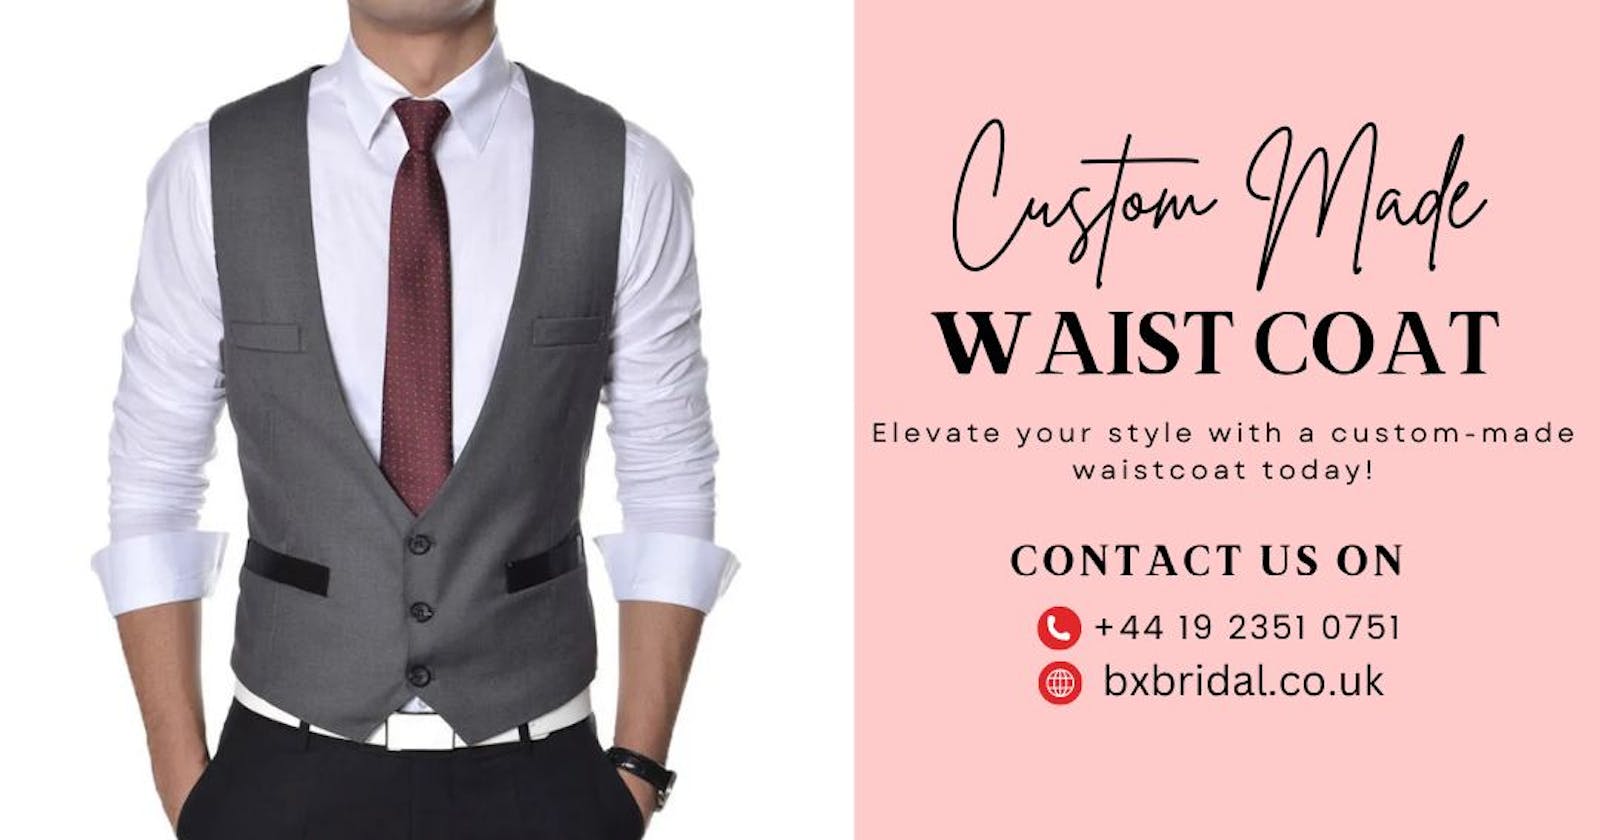 Get the Best Custom Made Waistcoat in the UK at BX Bridal & Groom